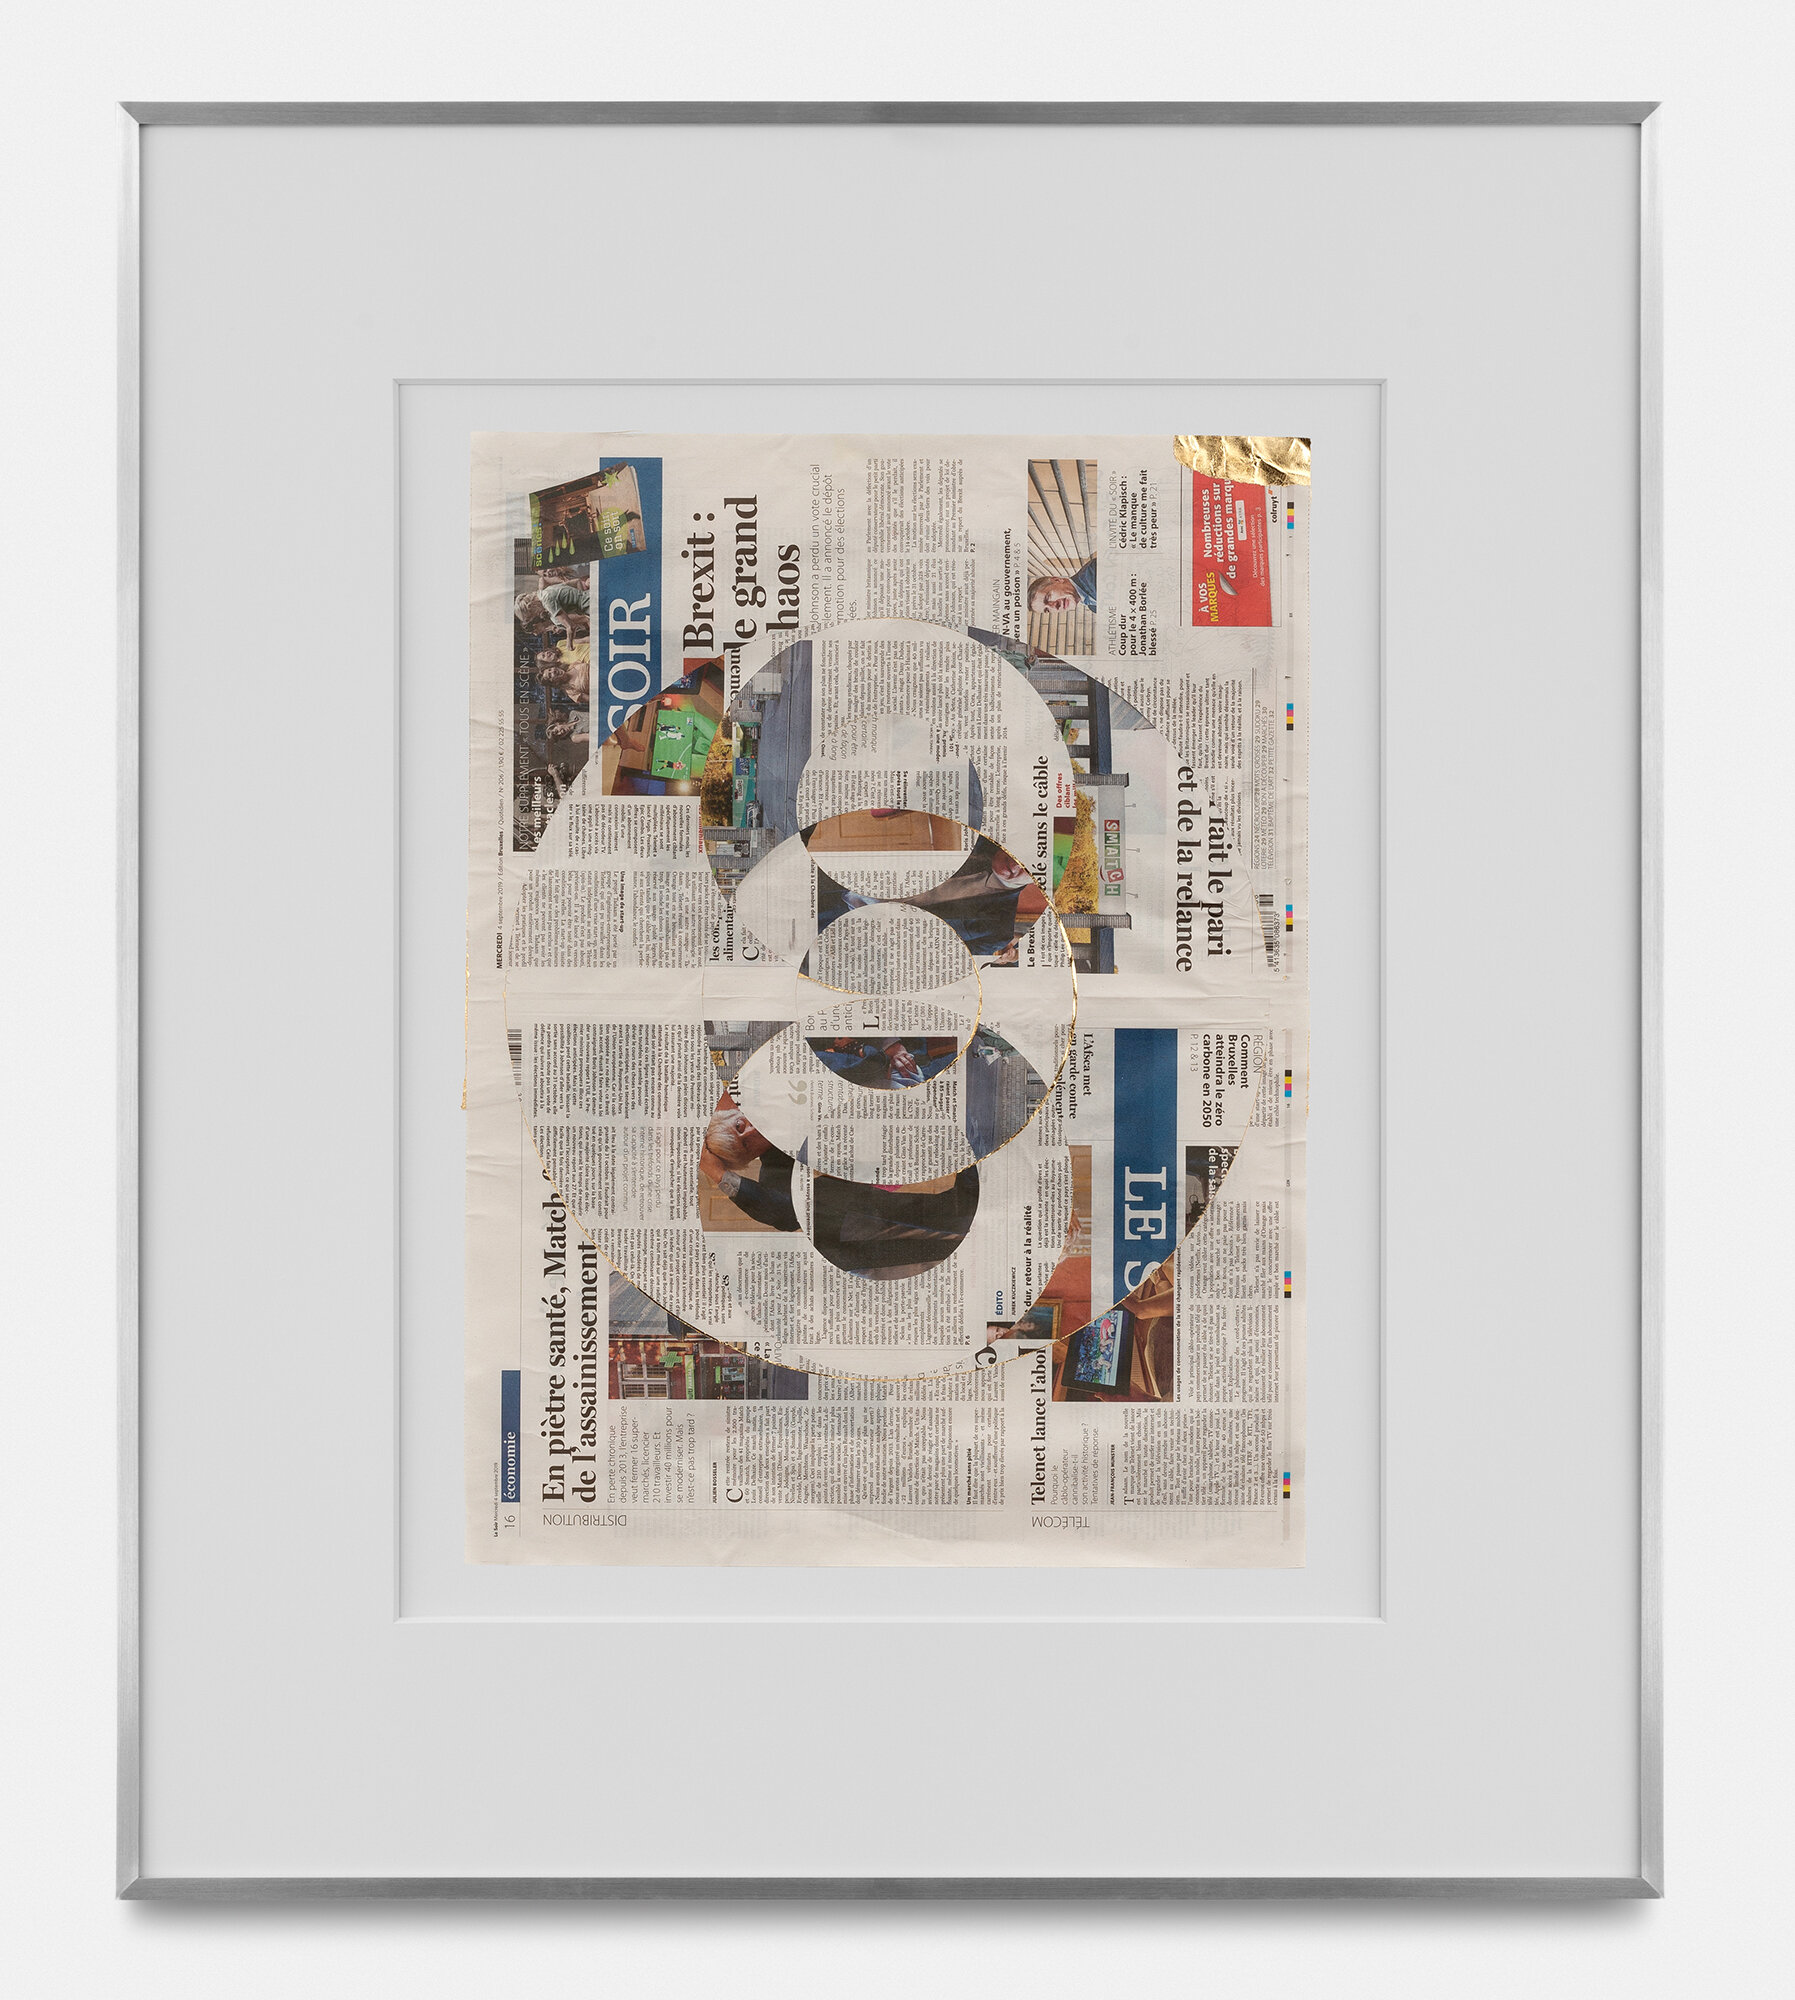   Blind Collage (Three 180° Rotations, Le Soir, Wednesday, September 4, 2019)    2019   Newspaper, tape, and 22 karat gold leaf  39 1/8 x 31 1/4 inches  Exhibition:  Three Pictures, 2019    